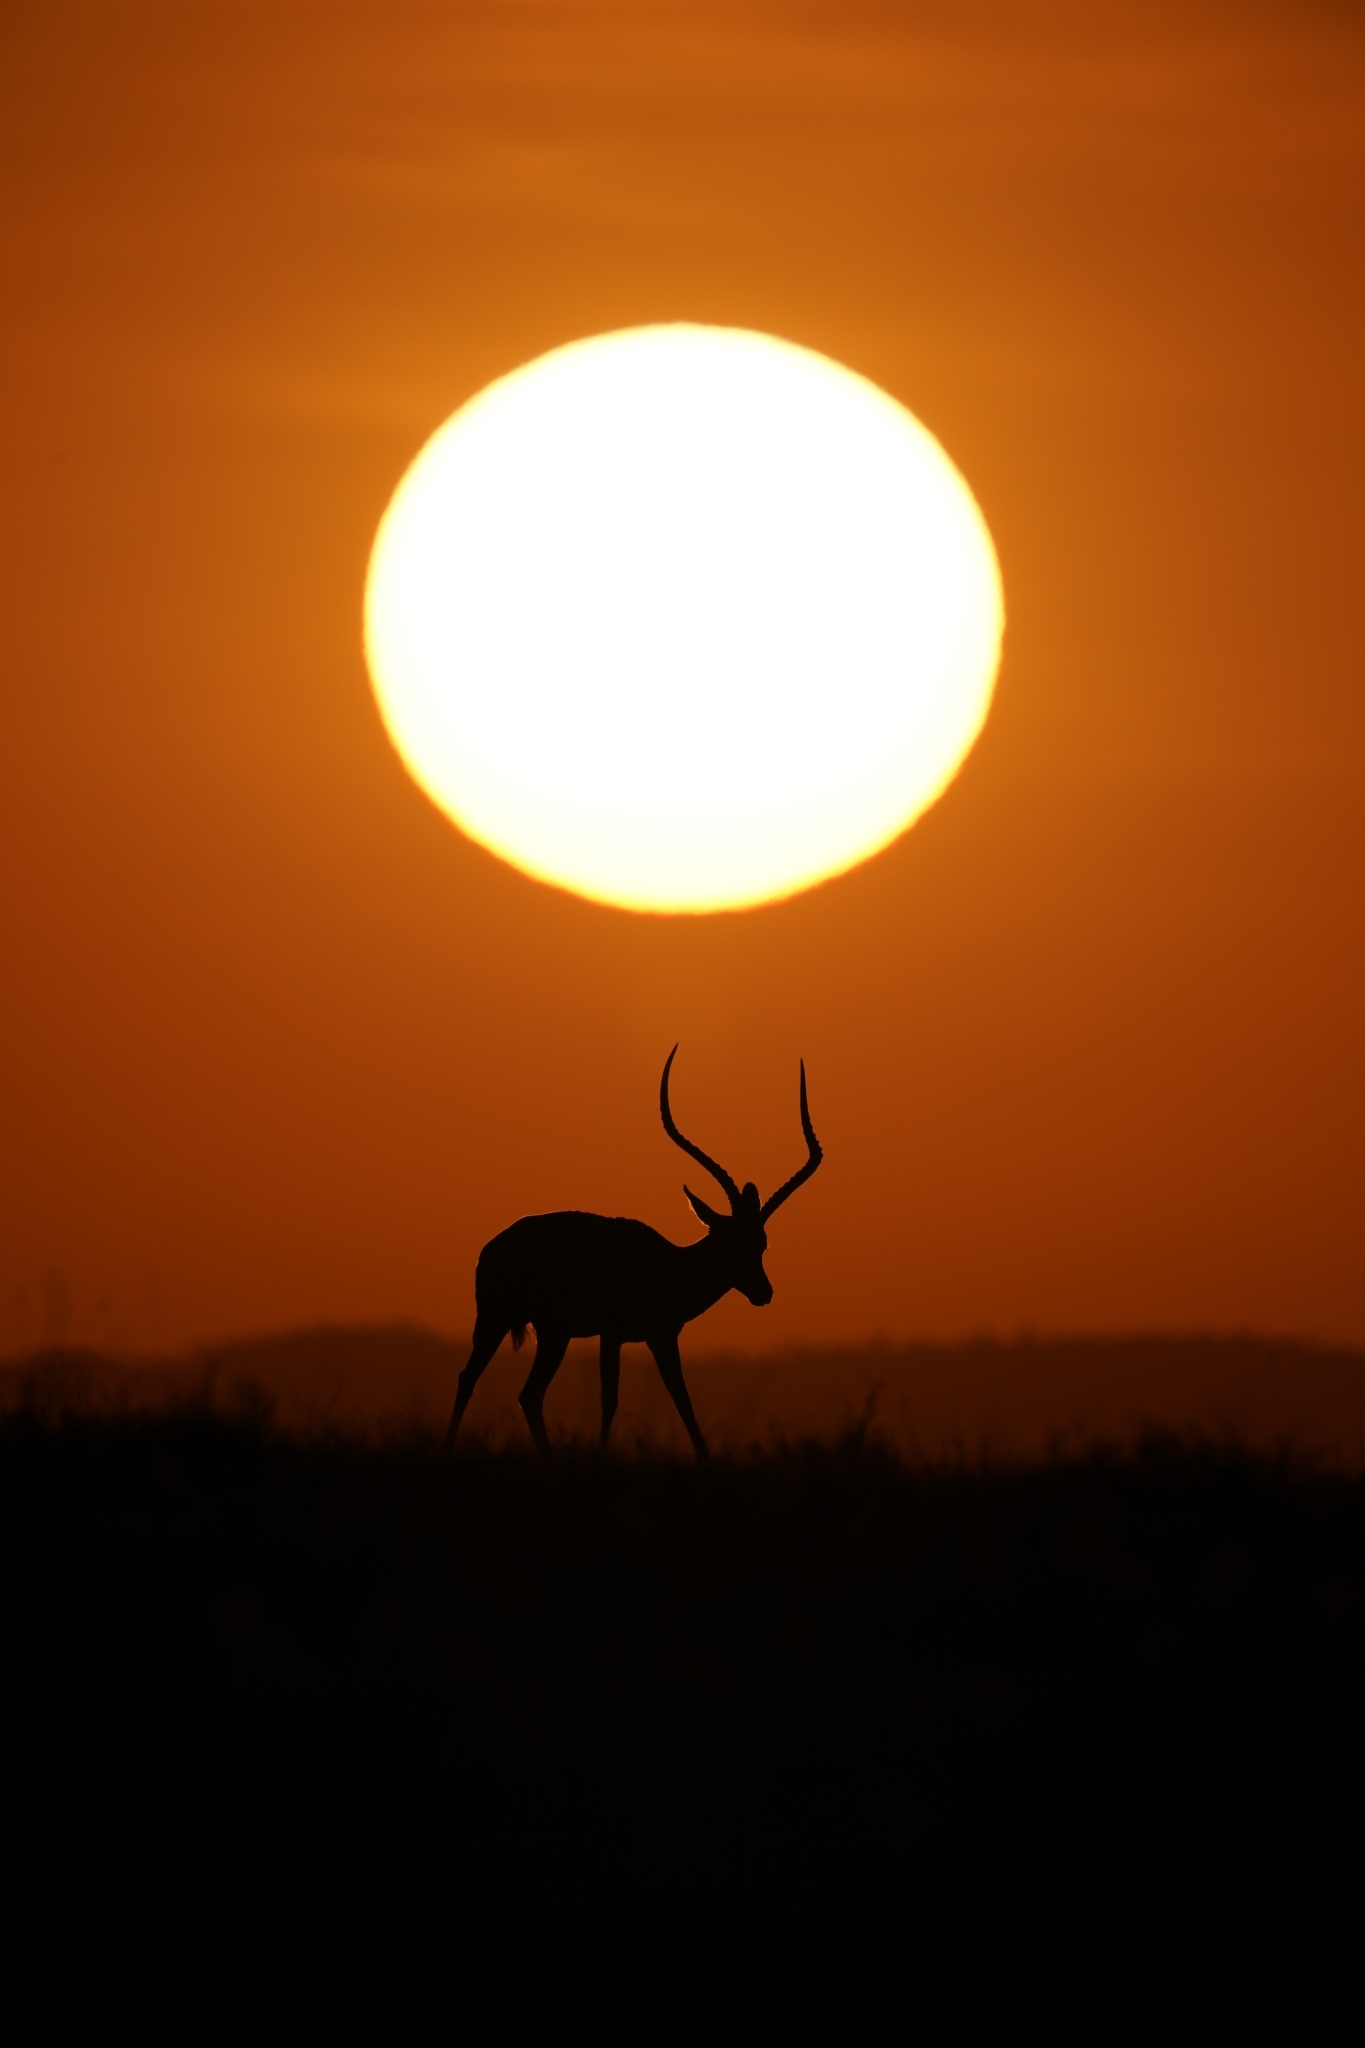 Antelope silhouetted against a large sun in an orange sky